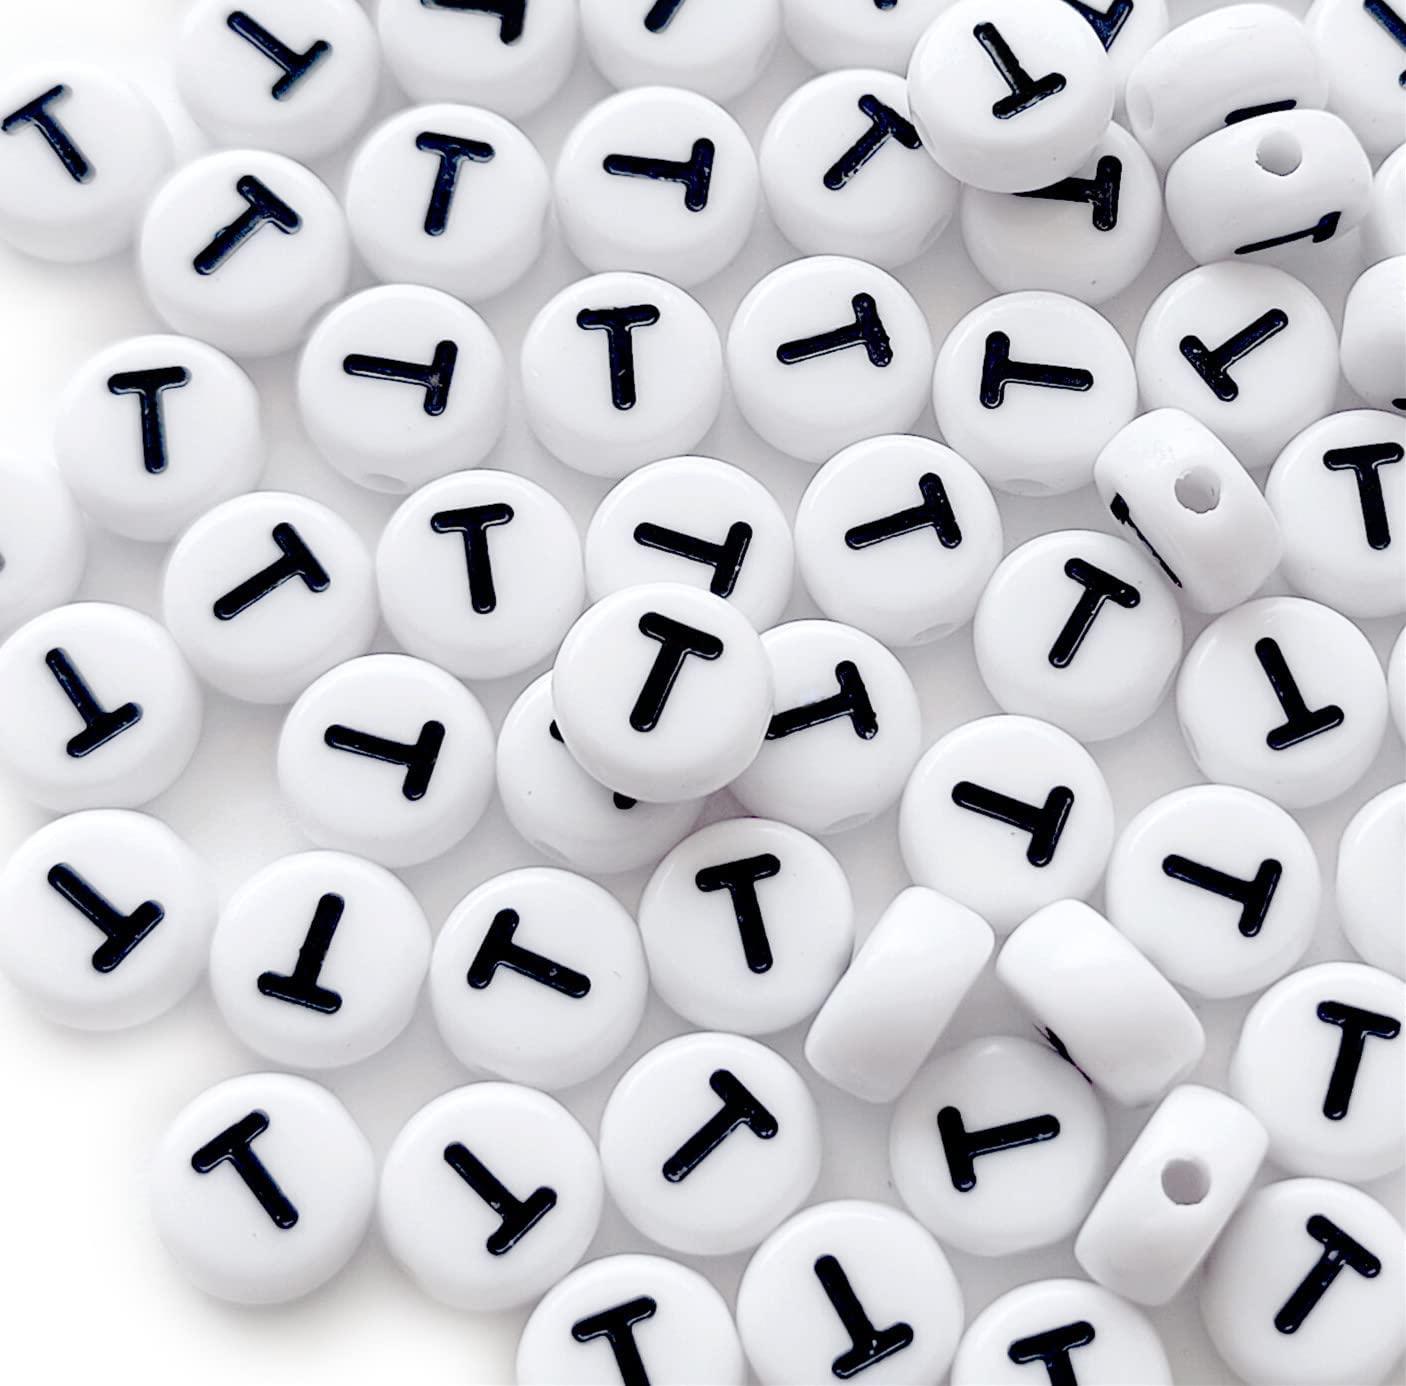 Bxwoum 100PCS Number Beads 4x7mm Acrylic Number Beads White Round Number 0  Beads for Jewelry Making DIY Bracelets Necklaces Key Chains(Number